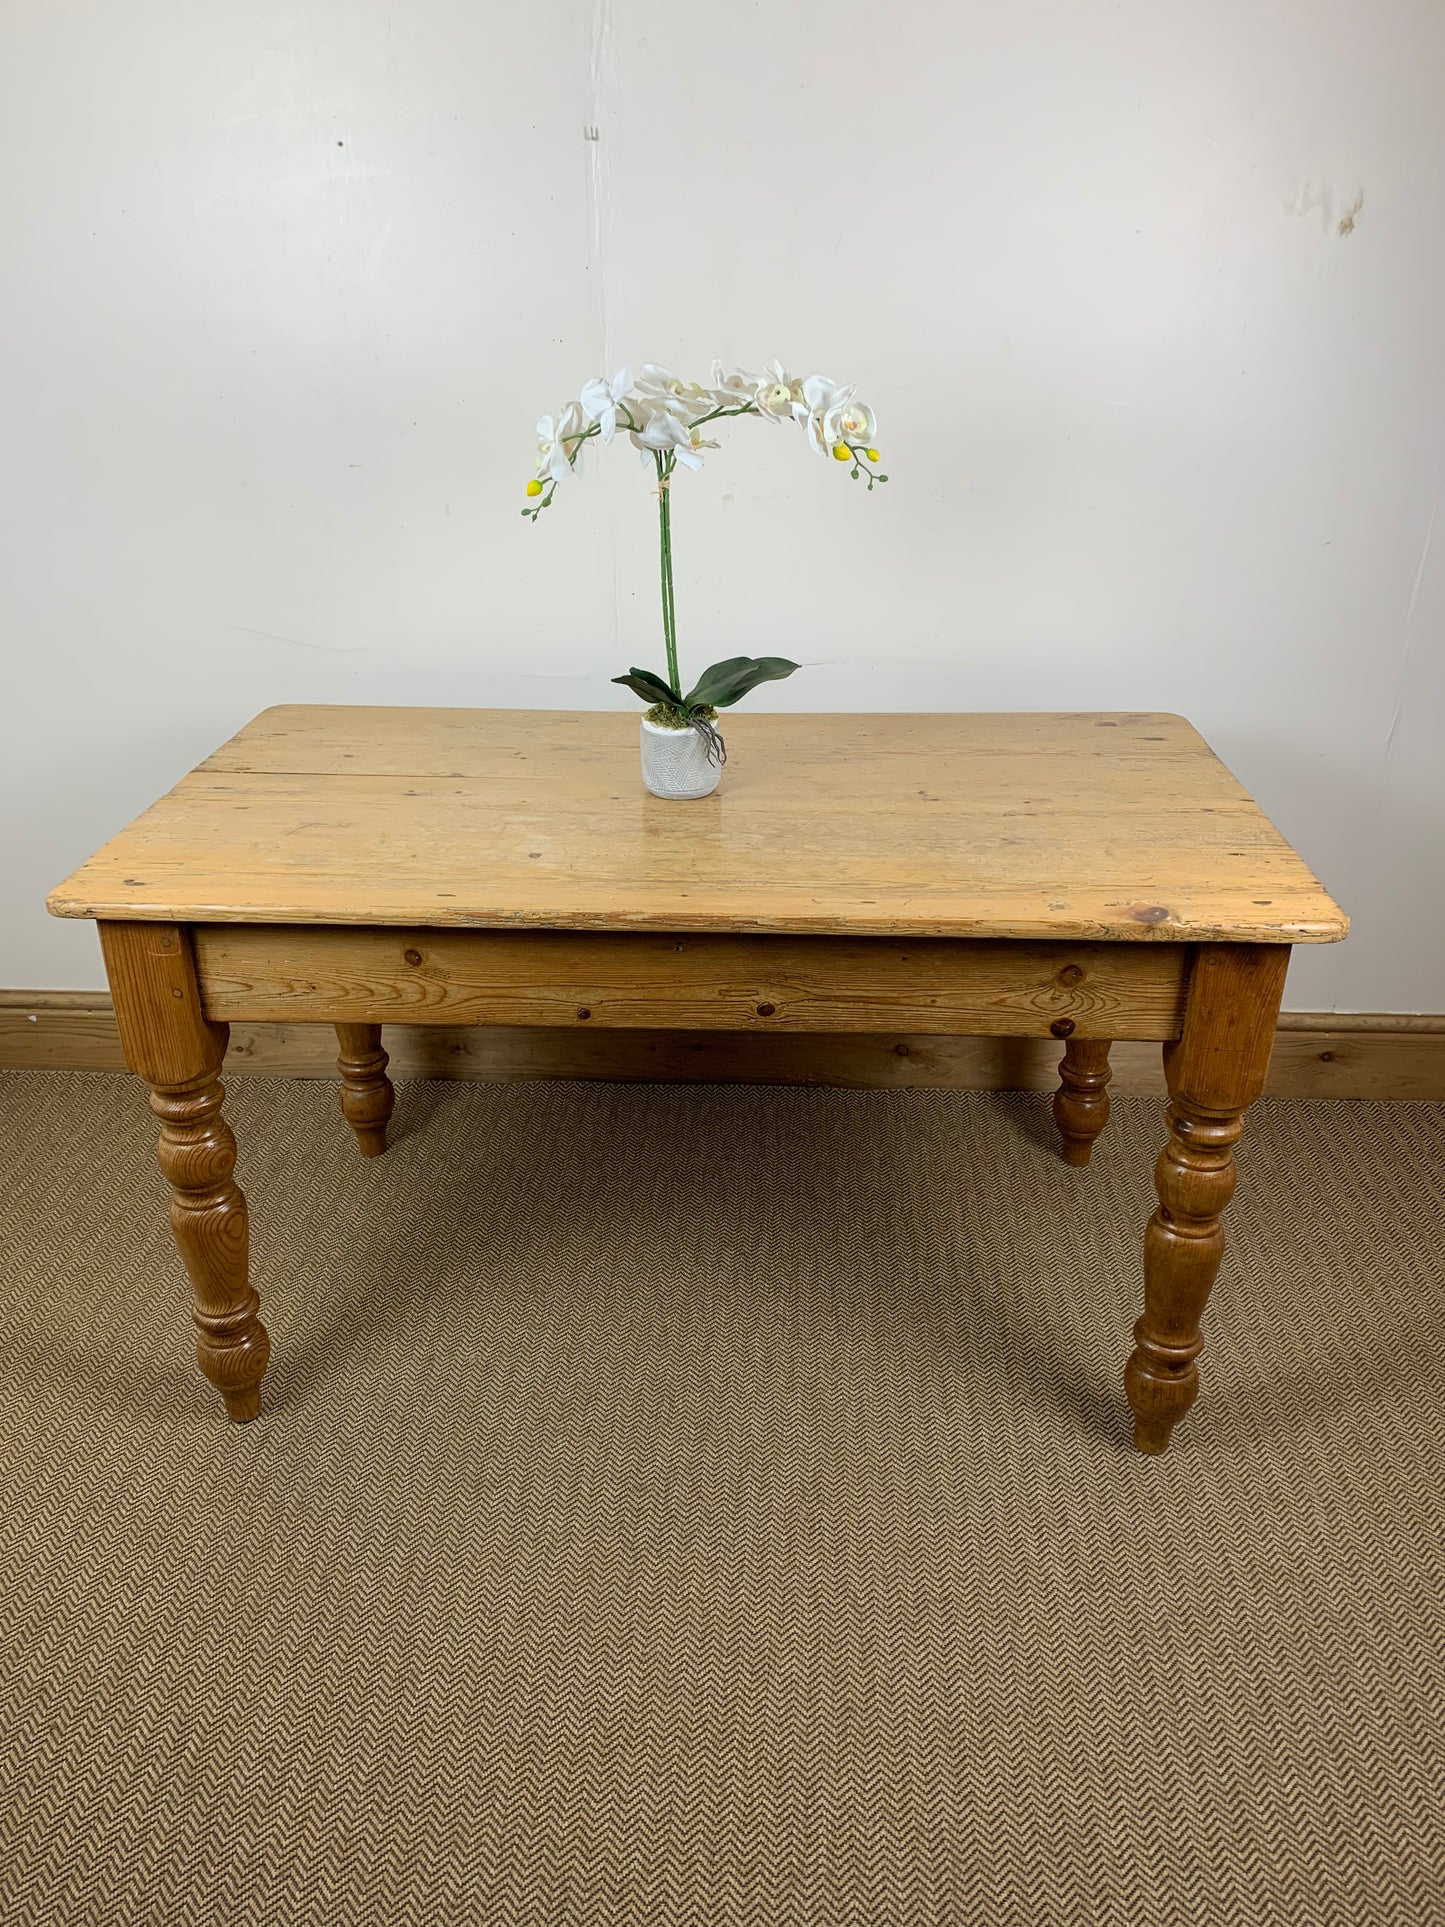 Victorian Pine Table - Vintage Elegance for Your Home